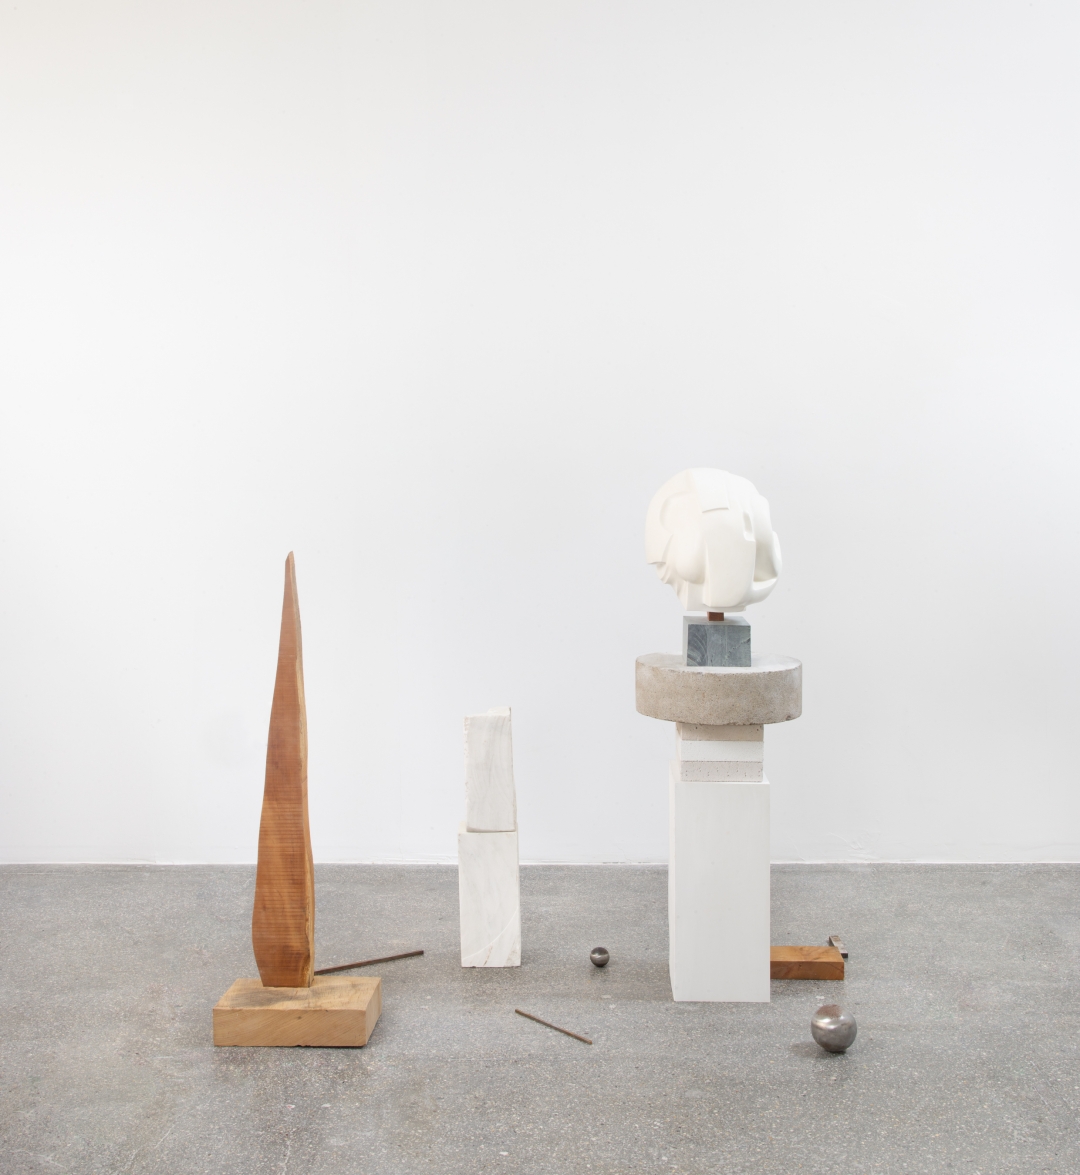 Christina Kruse, <i>Will o' the wisp</i>, 2021, sculpture with 11 elements: 3 marble blocks, wood, metal spheres, lead bars and lead stick, dimensions variable